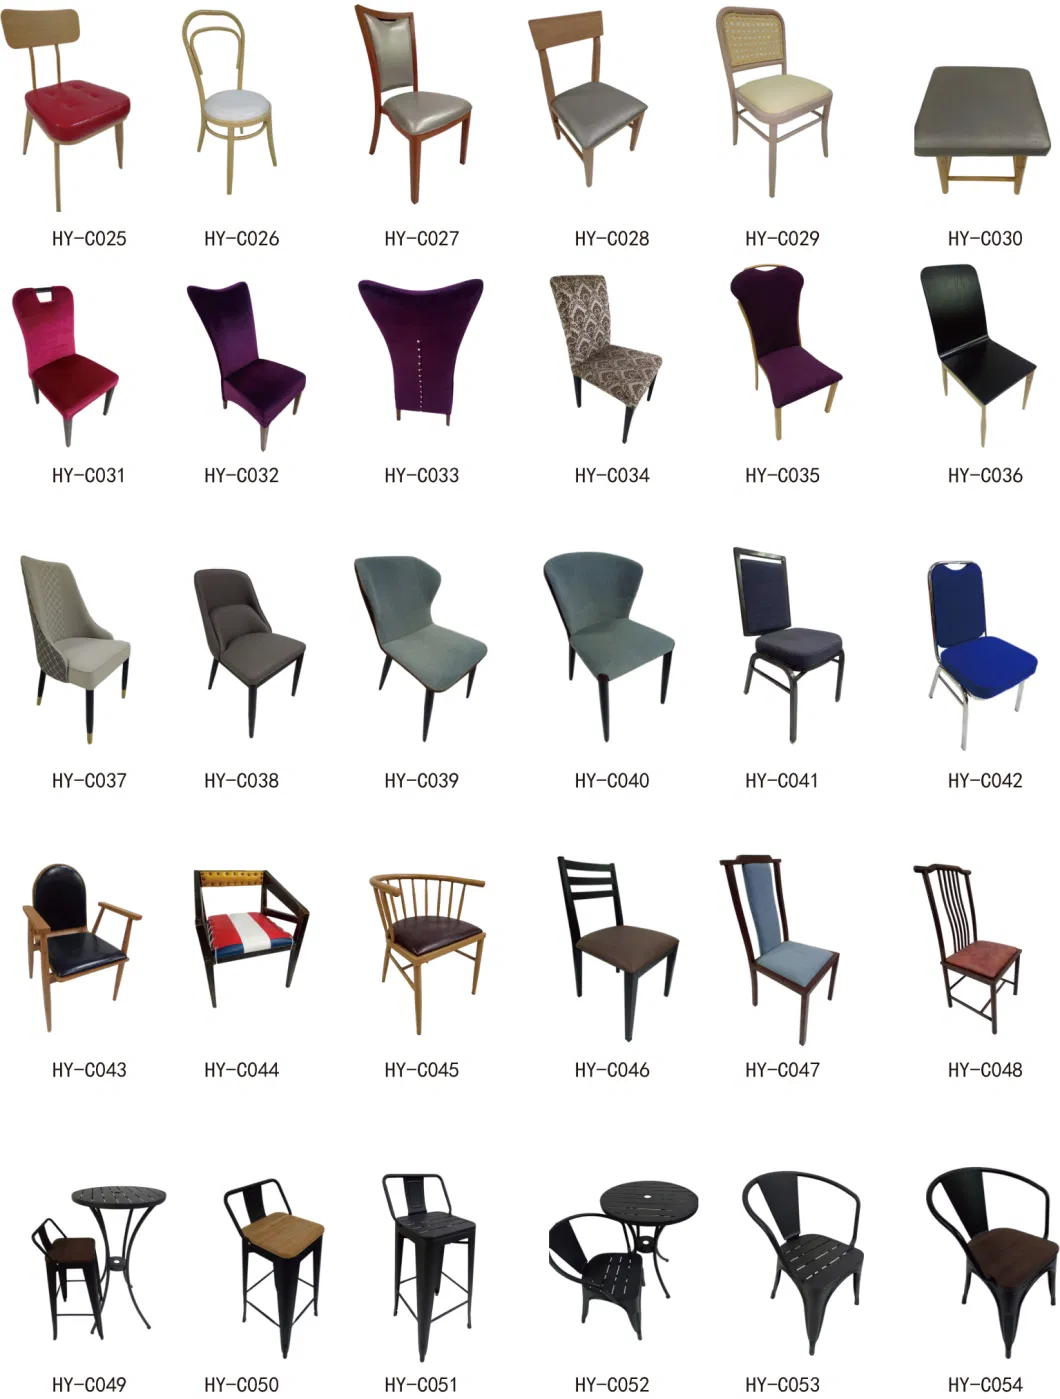 4 Seats Outdoor & Indoor Matched Coffee Chair Set Outdoor Furniture Violet Fabric Chairs Leisure Chair